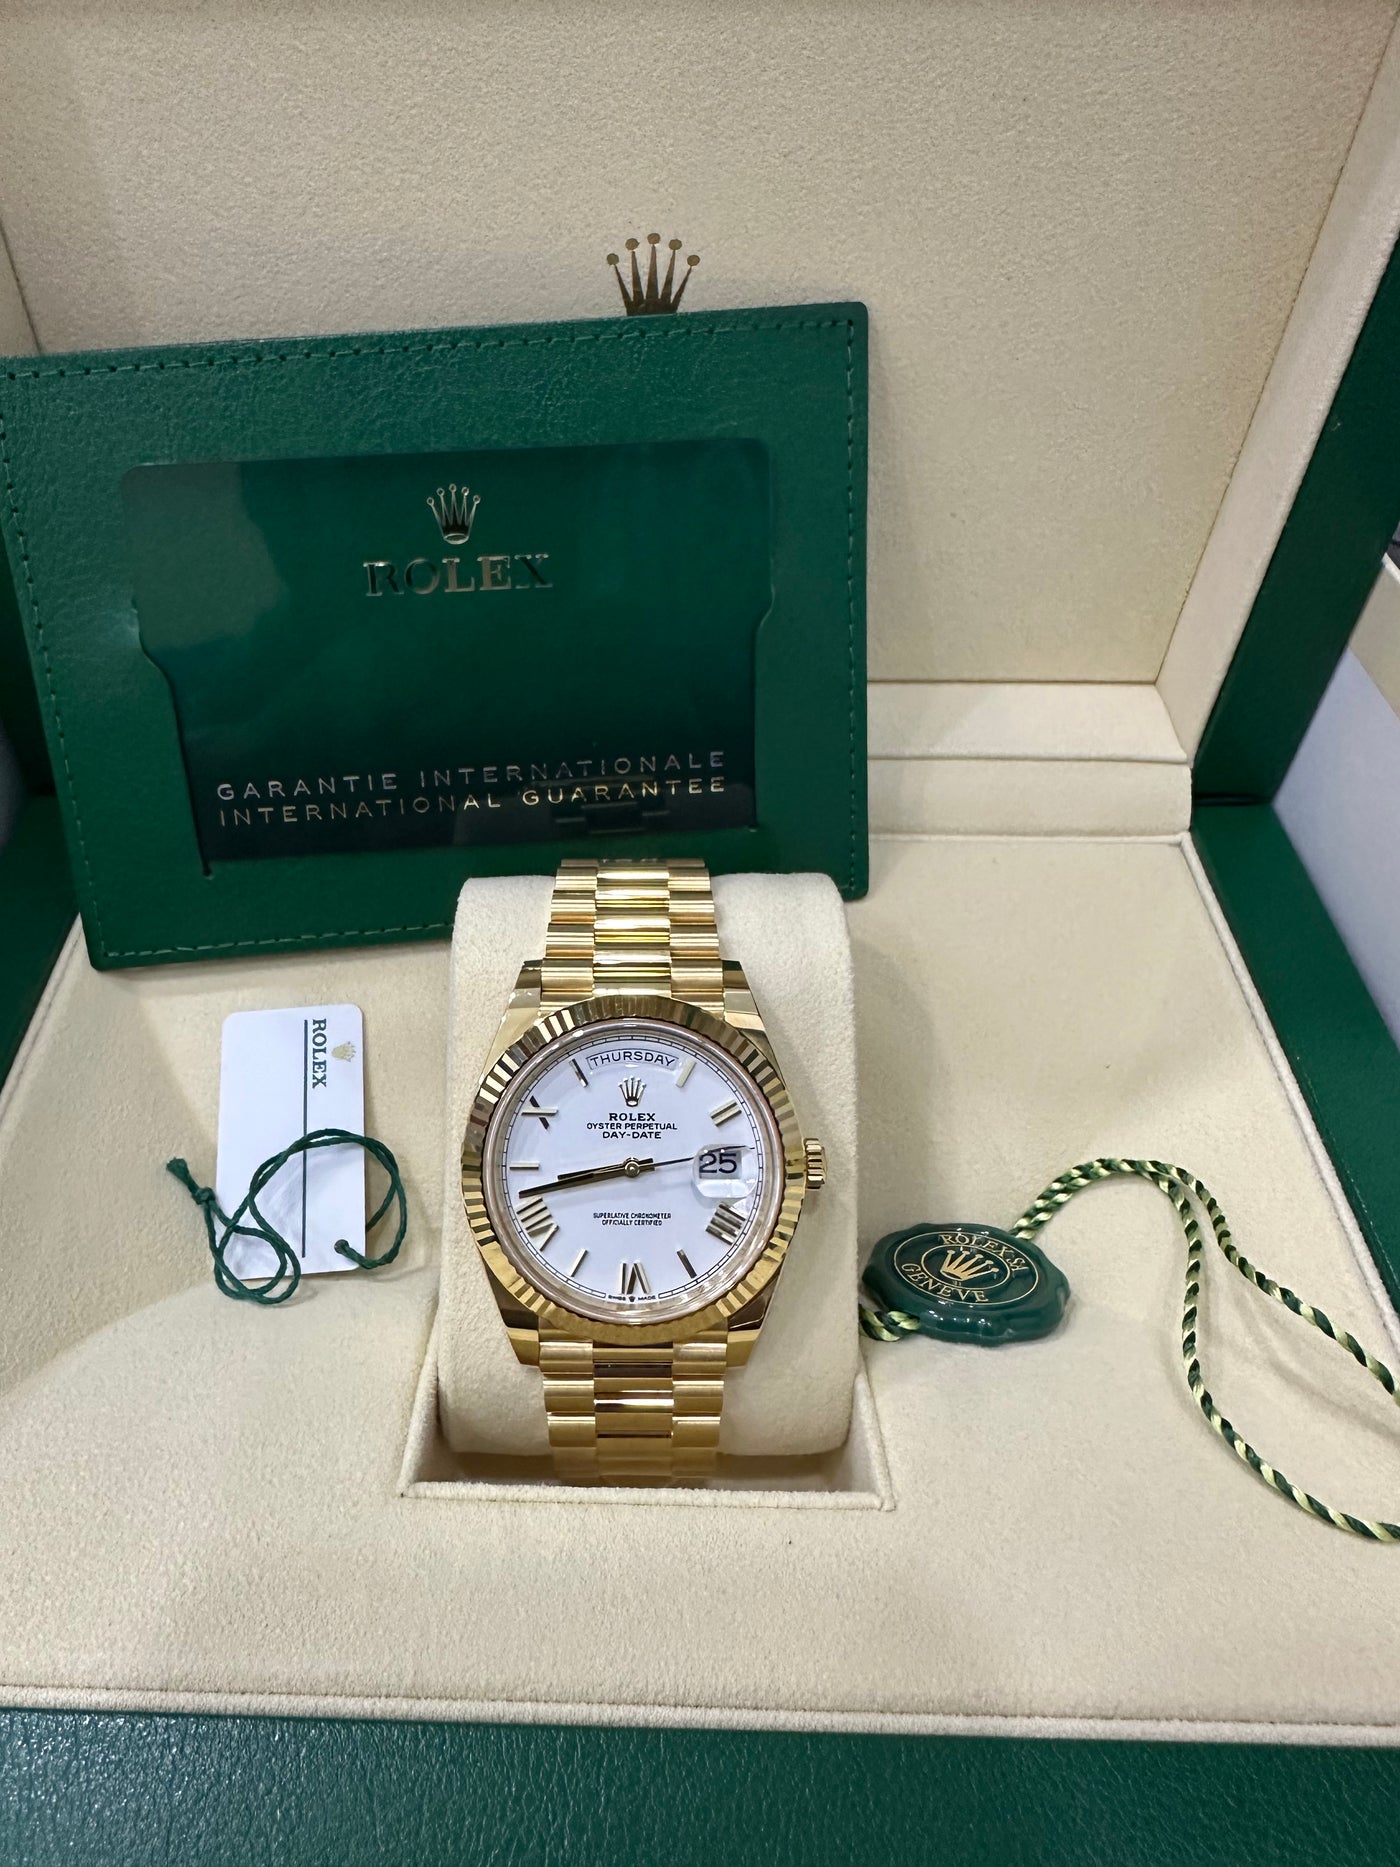 ROLEX DAY-DATE 40 YELLOW GOLD WHITE ROMAN DIAL & FLUTED BEZEL PRESIDENT BRACELET 228238 PREOWNED